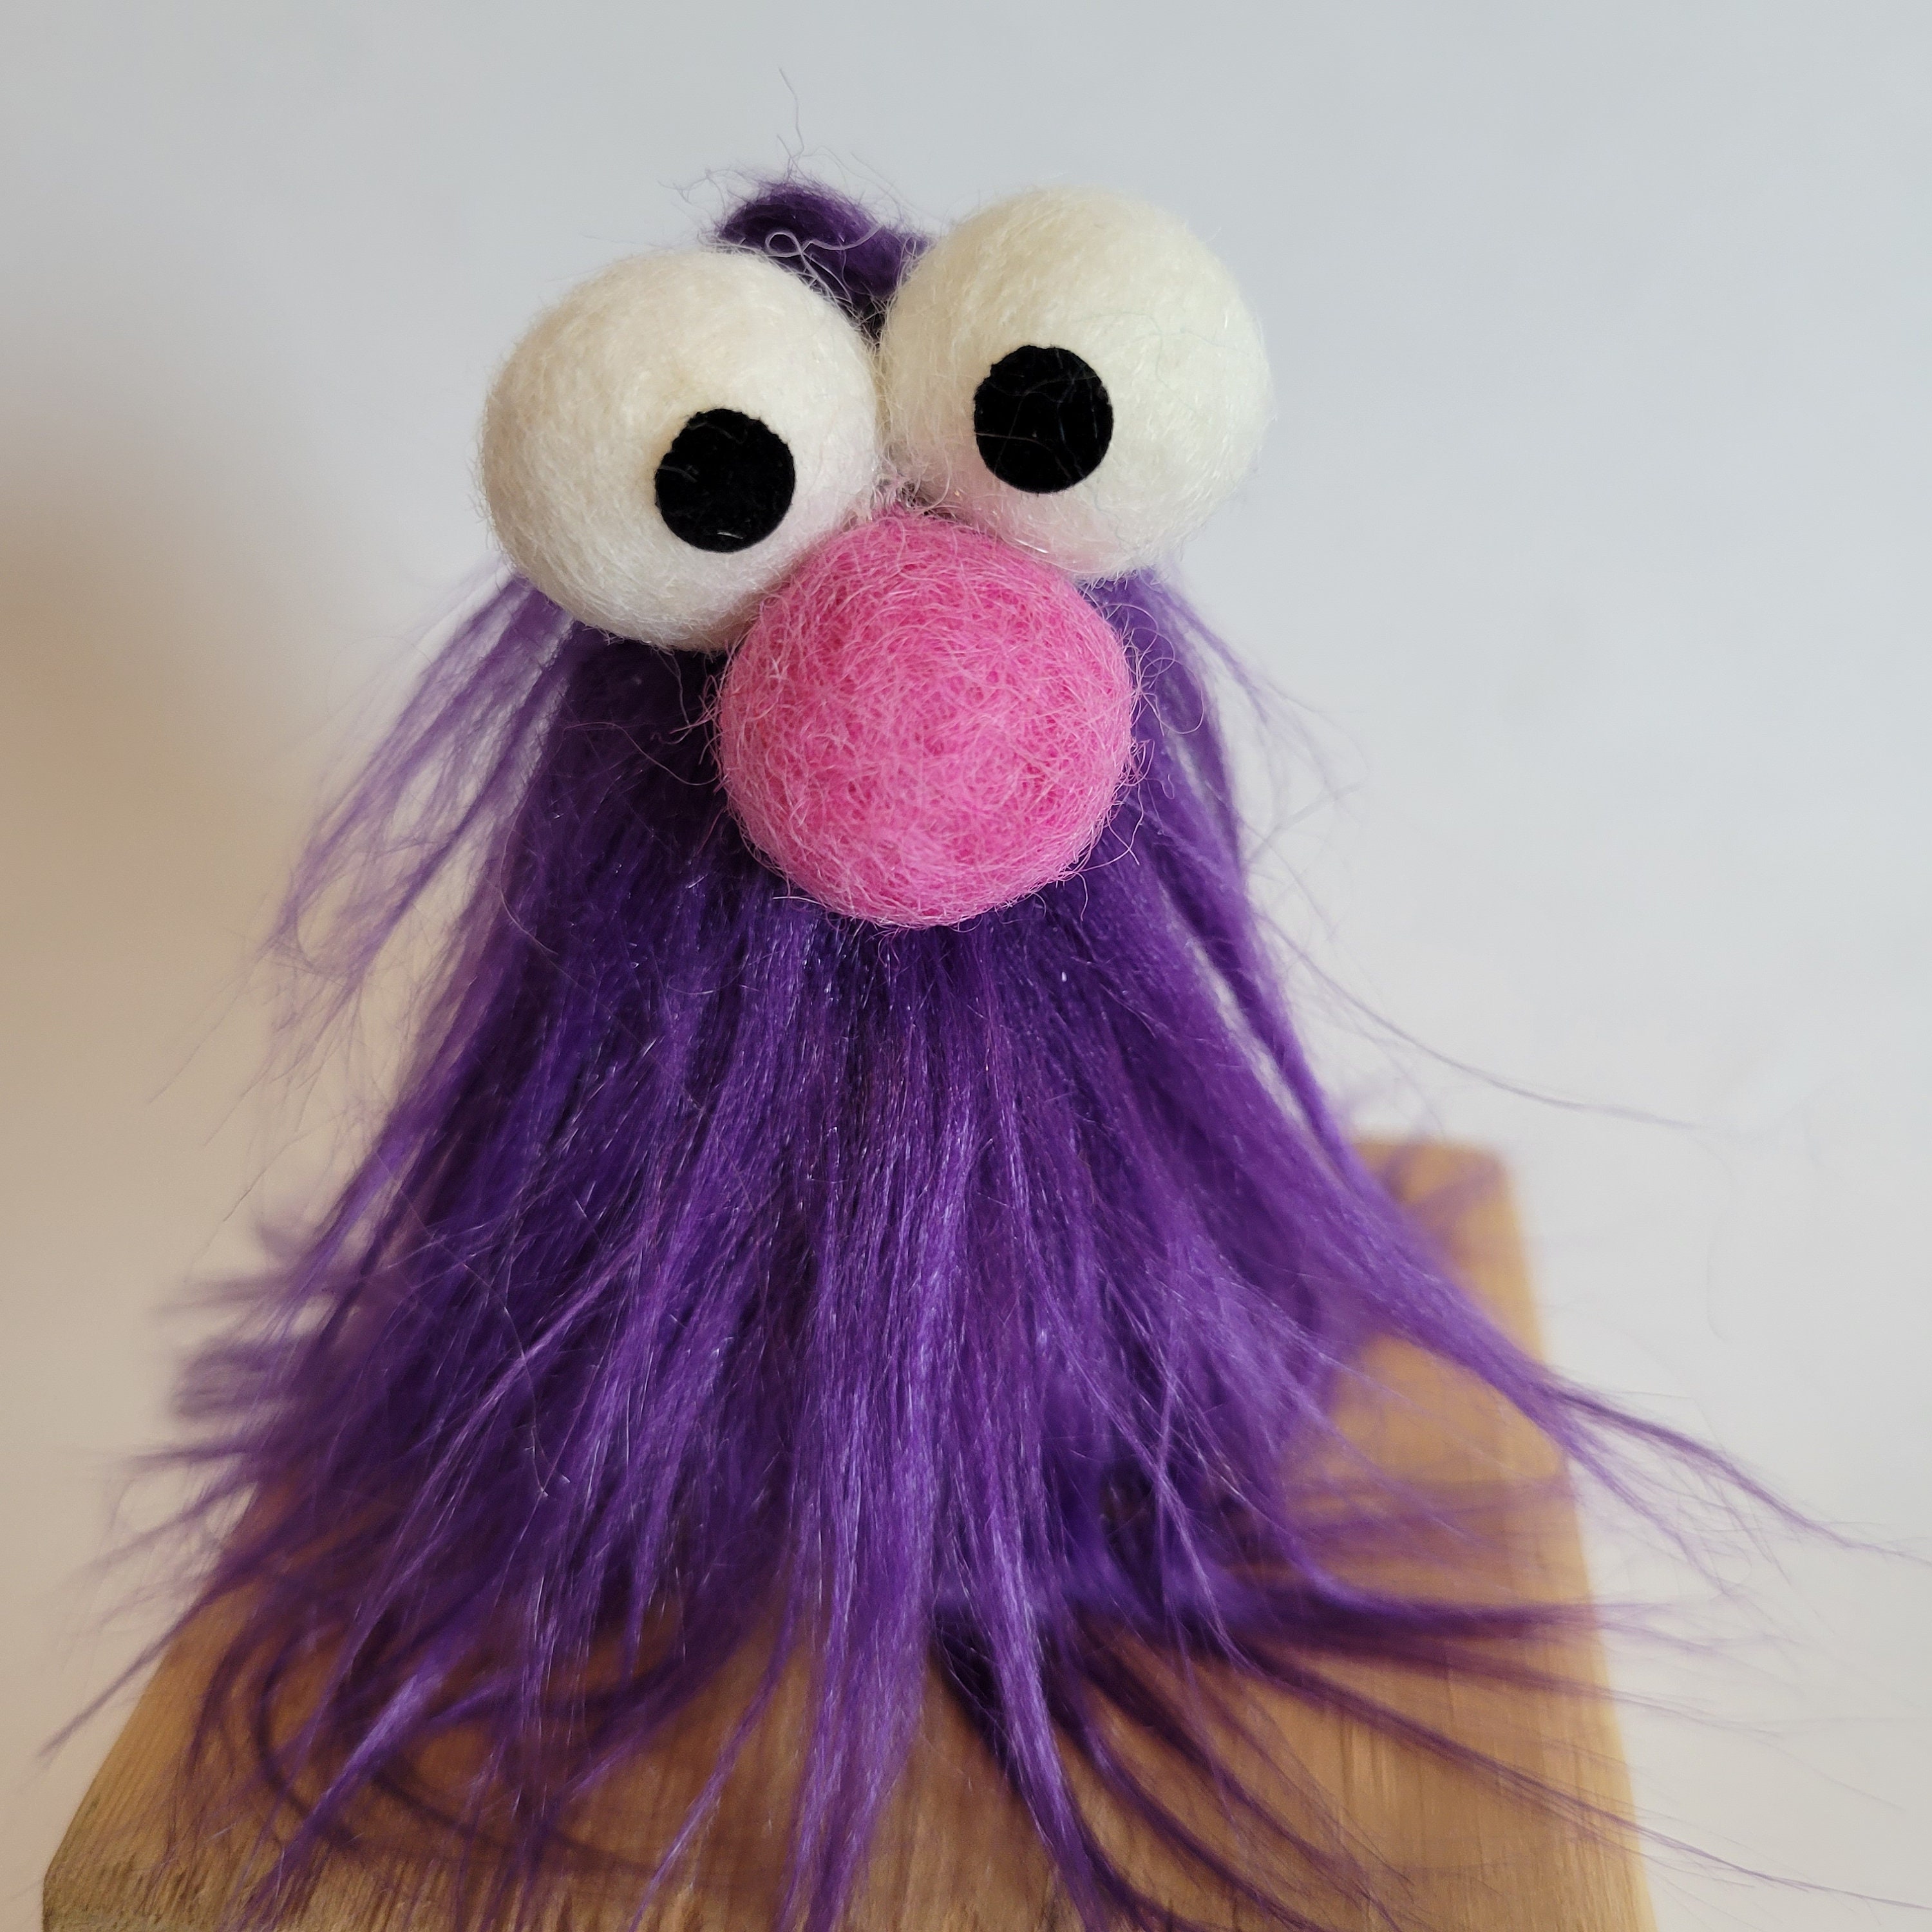 FUZZINGER A Fuzzy Finger Puppet by All Hands Productions